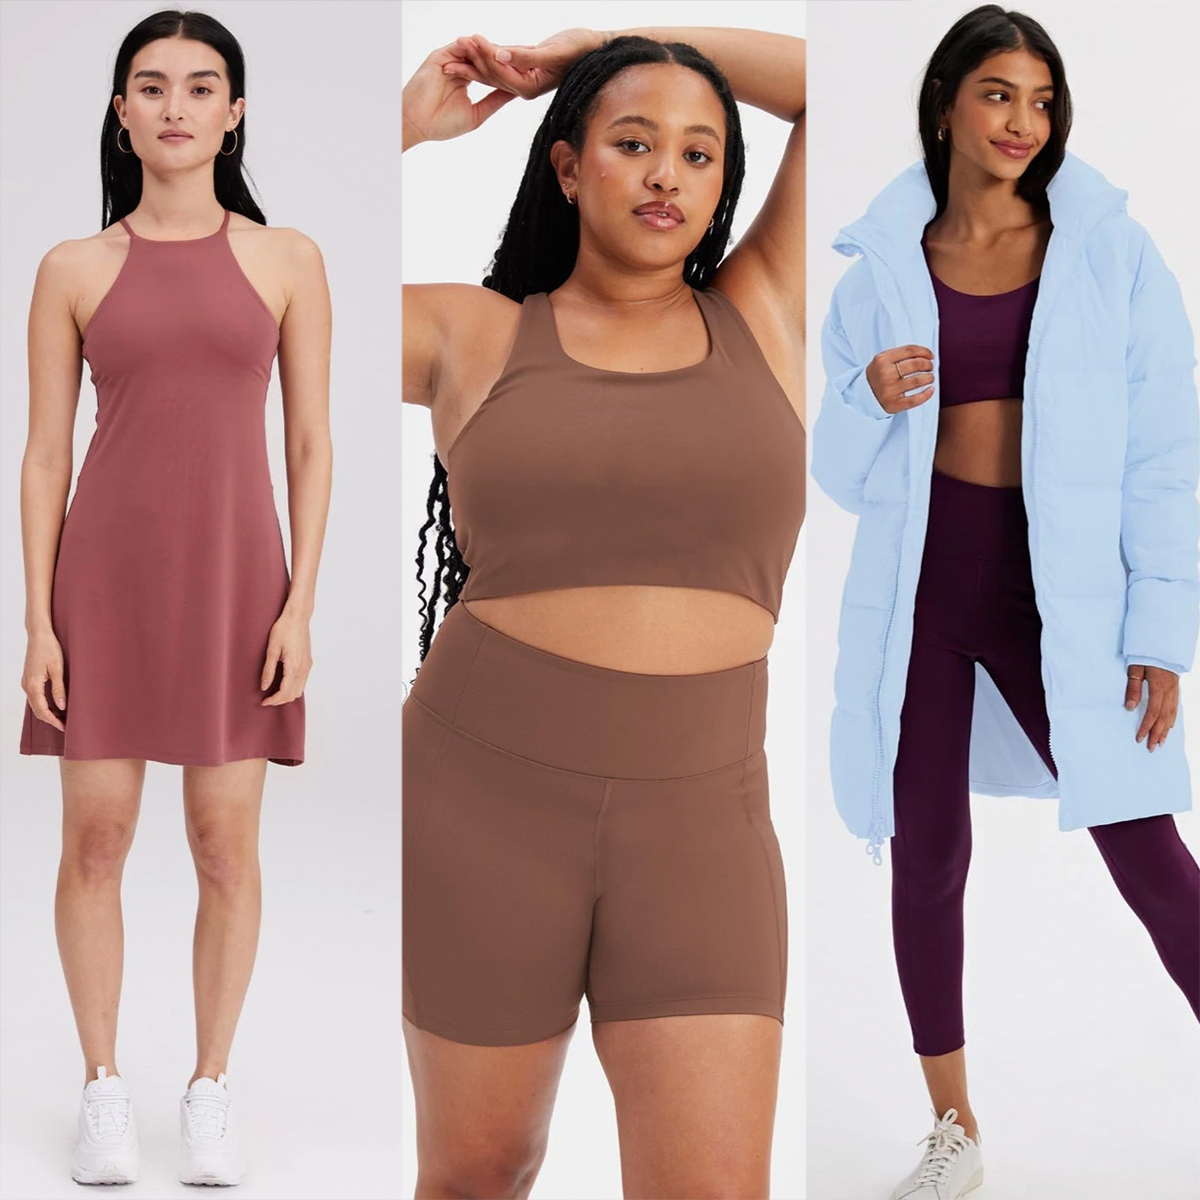 Girlfriend Collective Boxing Day Sale: Save Up to 50% Off Sitewide